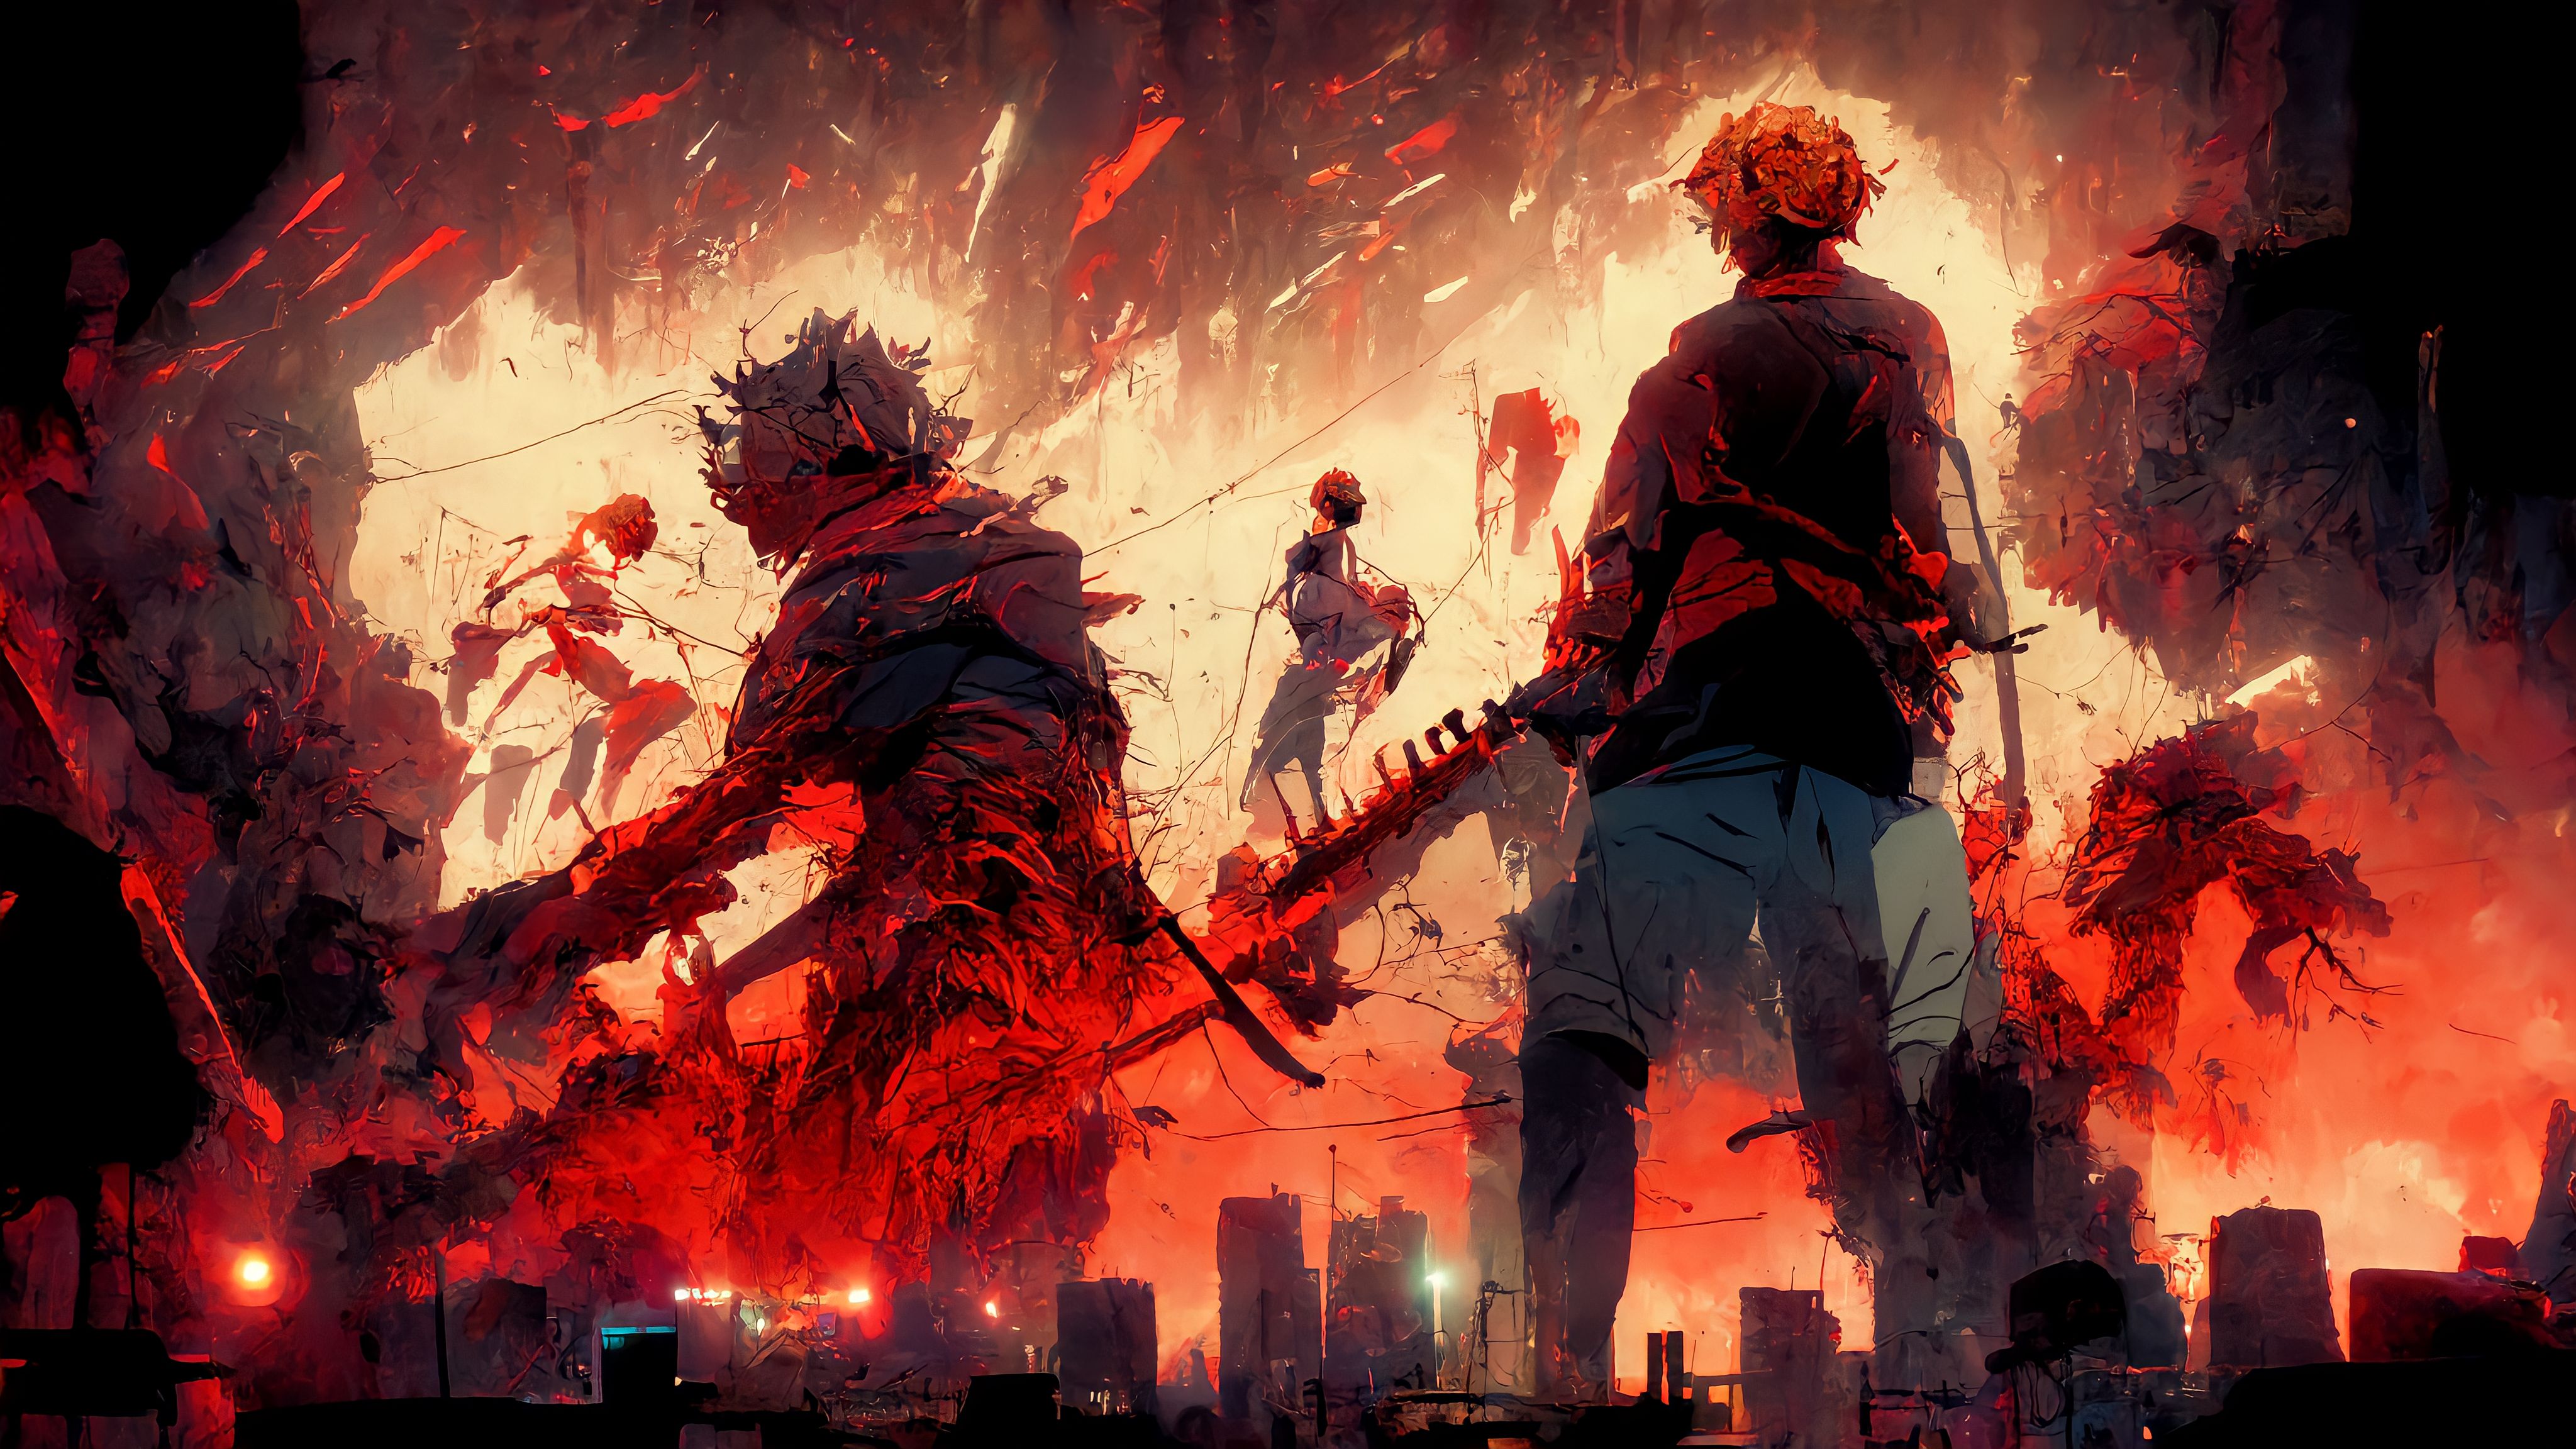 Anime City Anime Chainsaw Man Chainsaw Demons Fighting Epic Scene Red Background IA Art Anime Boys Wallpaper:4096x2304